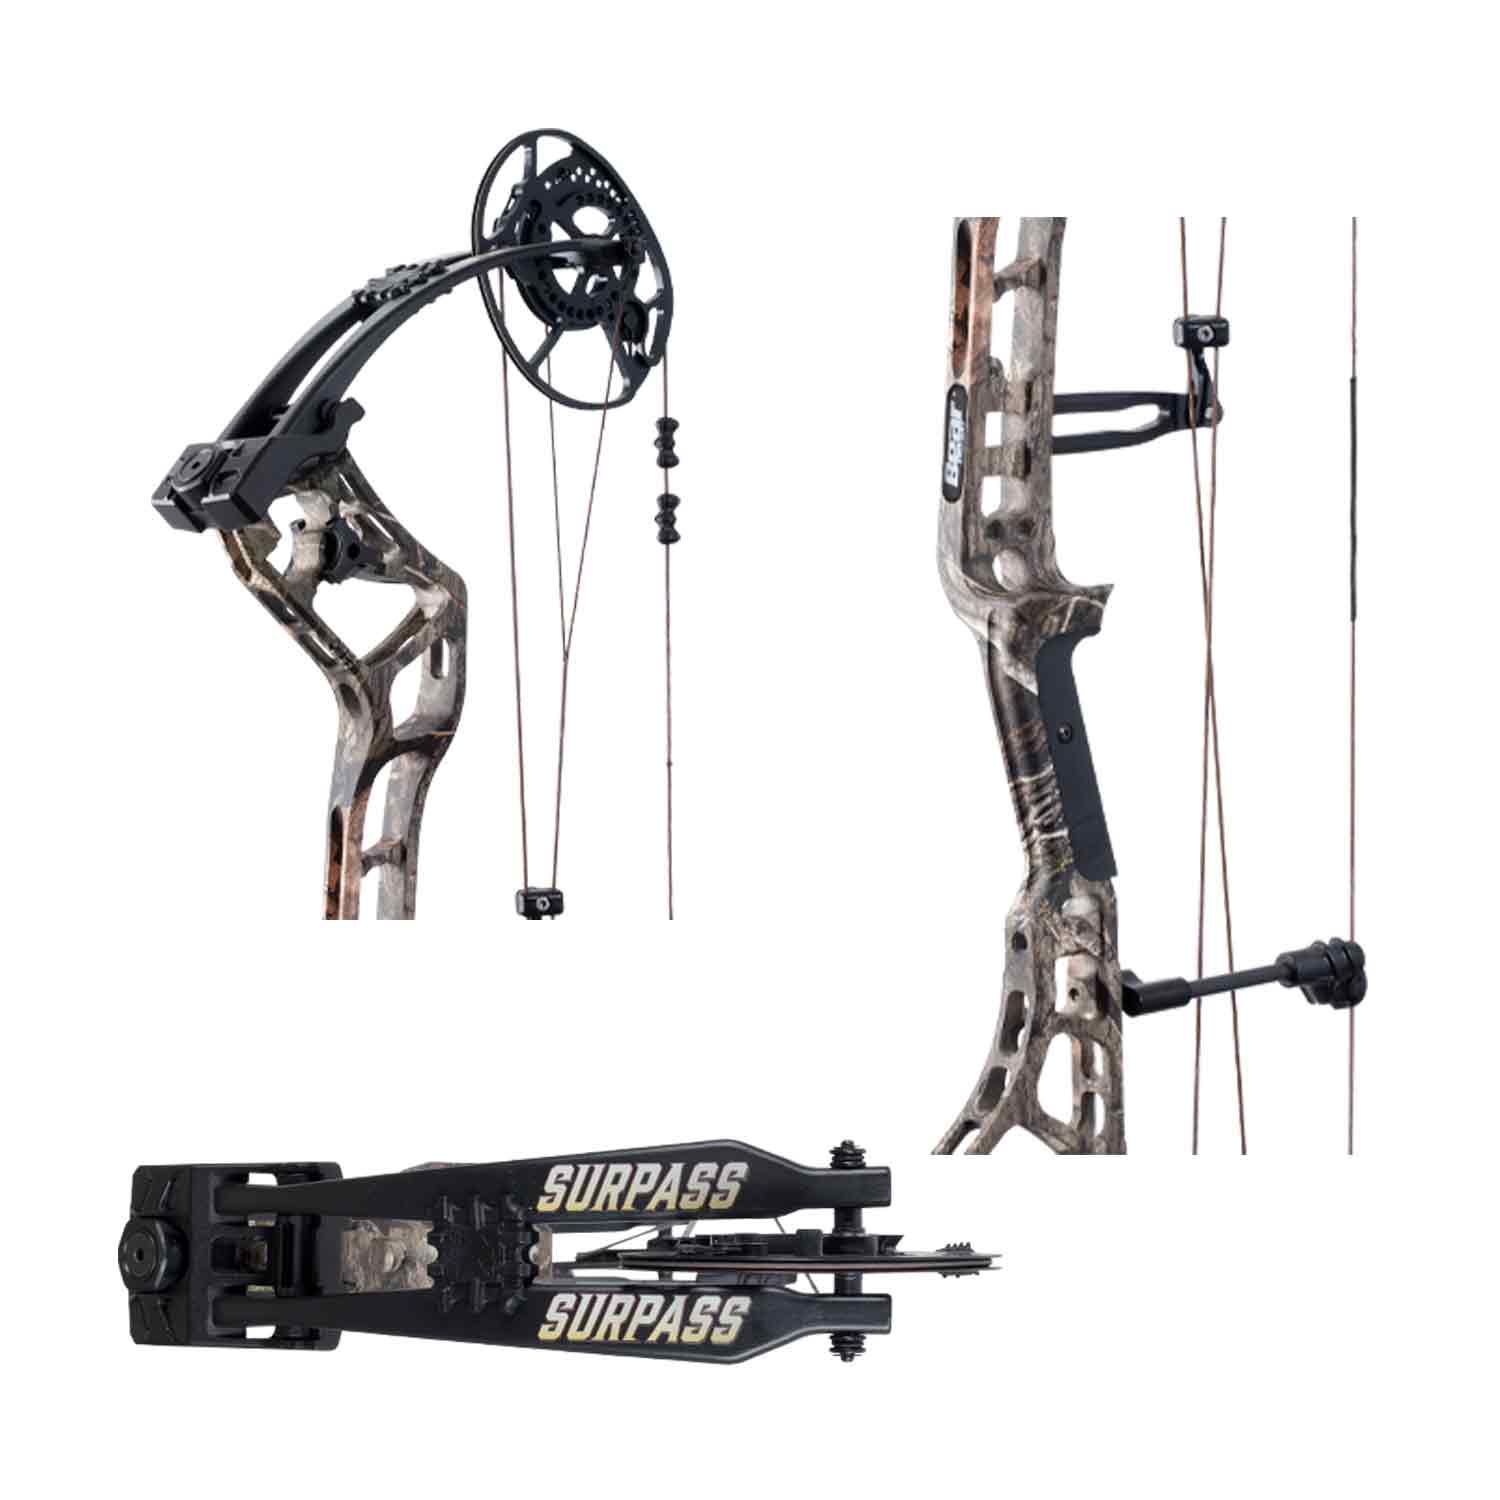 Bear Surpass Compound Hunting Bow